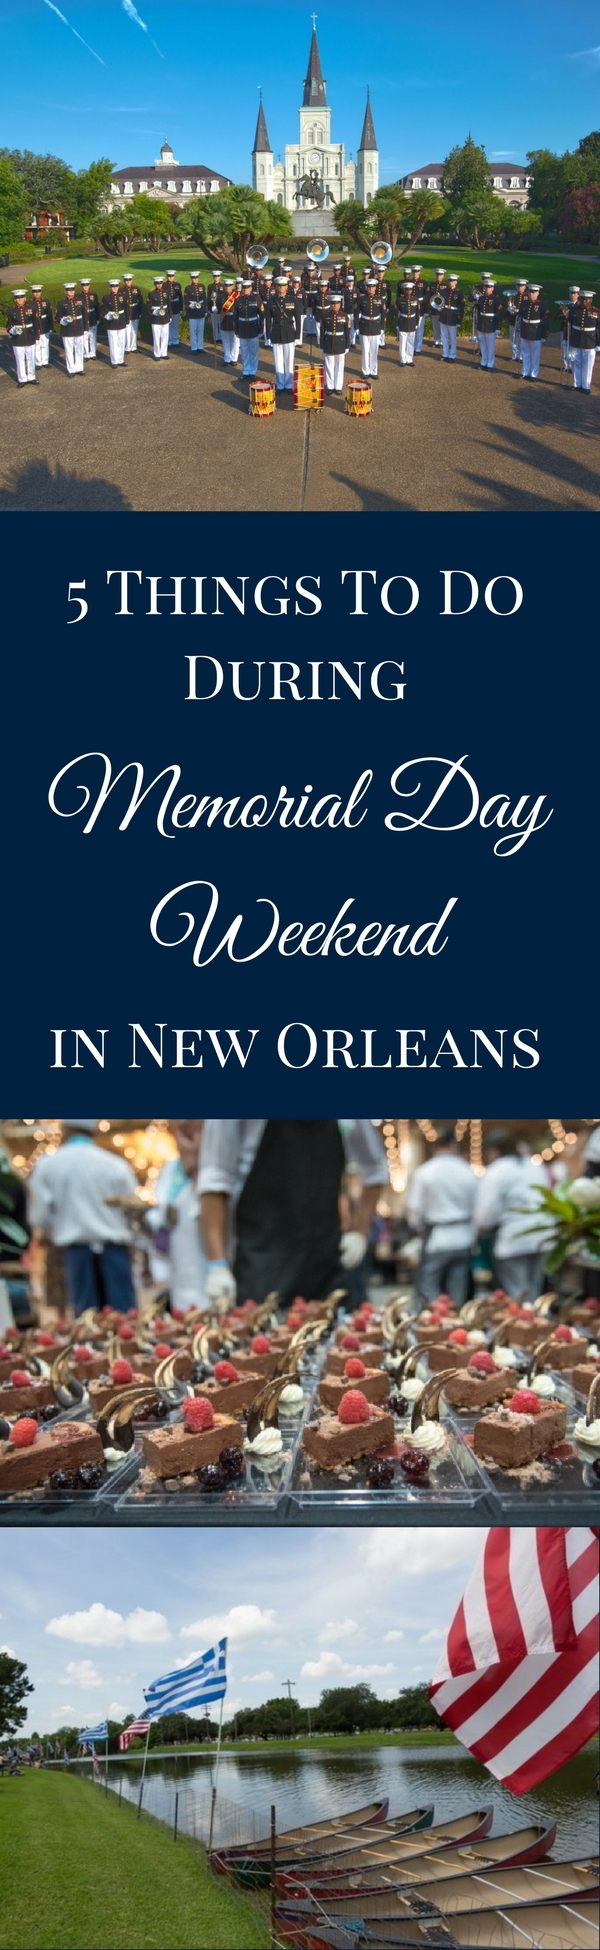 From Bayou Country SuperFest to the New Orleans Wine & Food Experience to honoring fallen soldiers at the National WWII Museum, there's plenty to do in New Orleans this Memorial Day weekend.